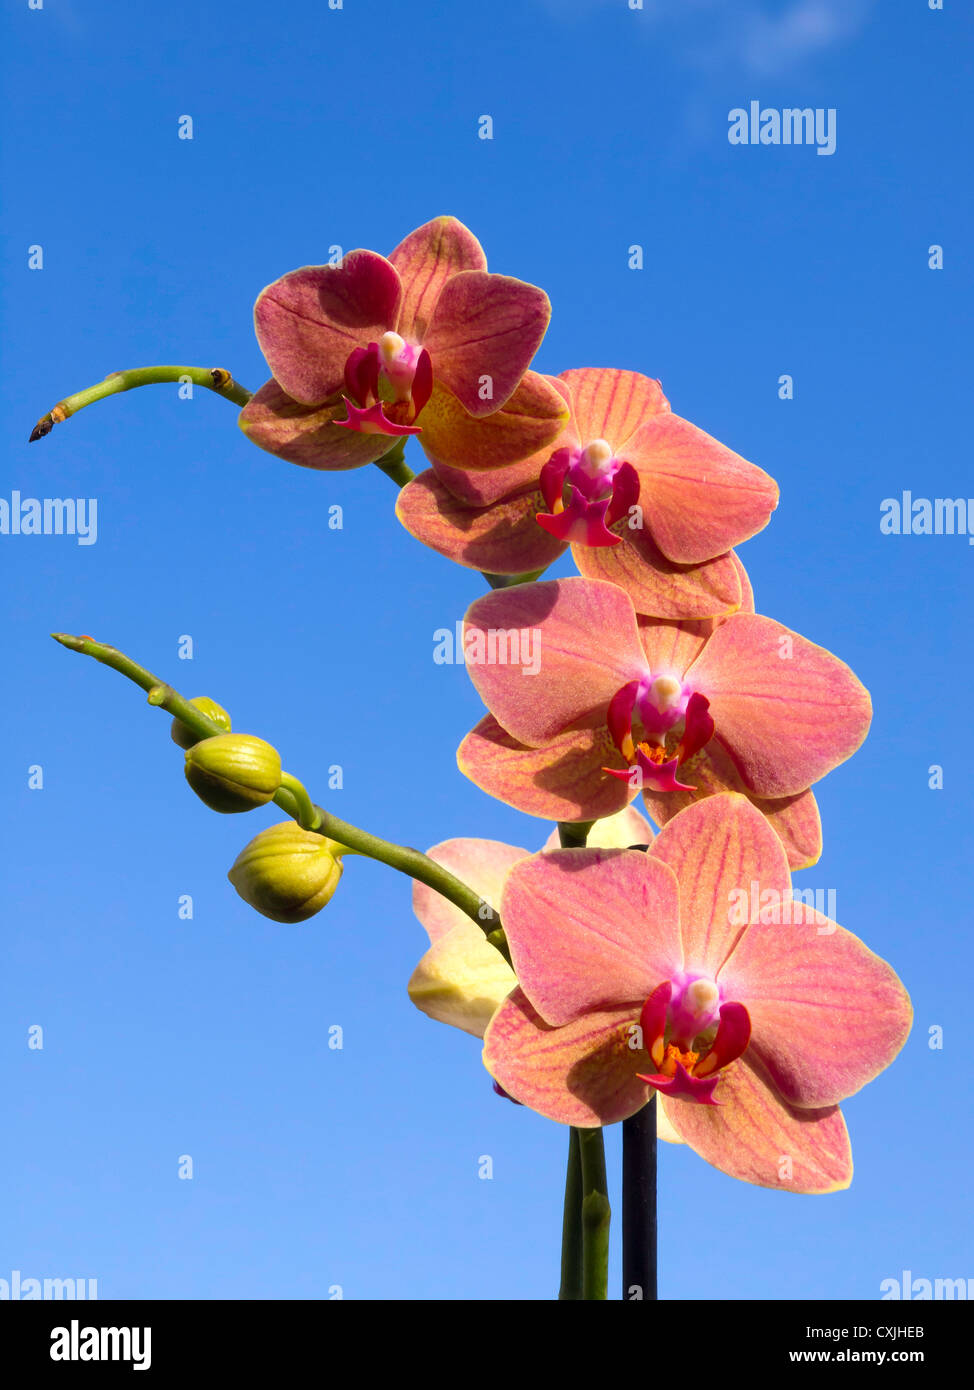 A Hybrid Phalaenopsis Moth Orchid Coloured Pink And Yellow Against A Stock Photo Alamy